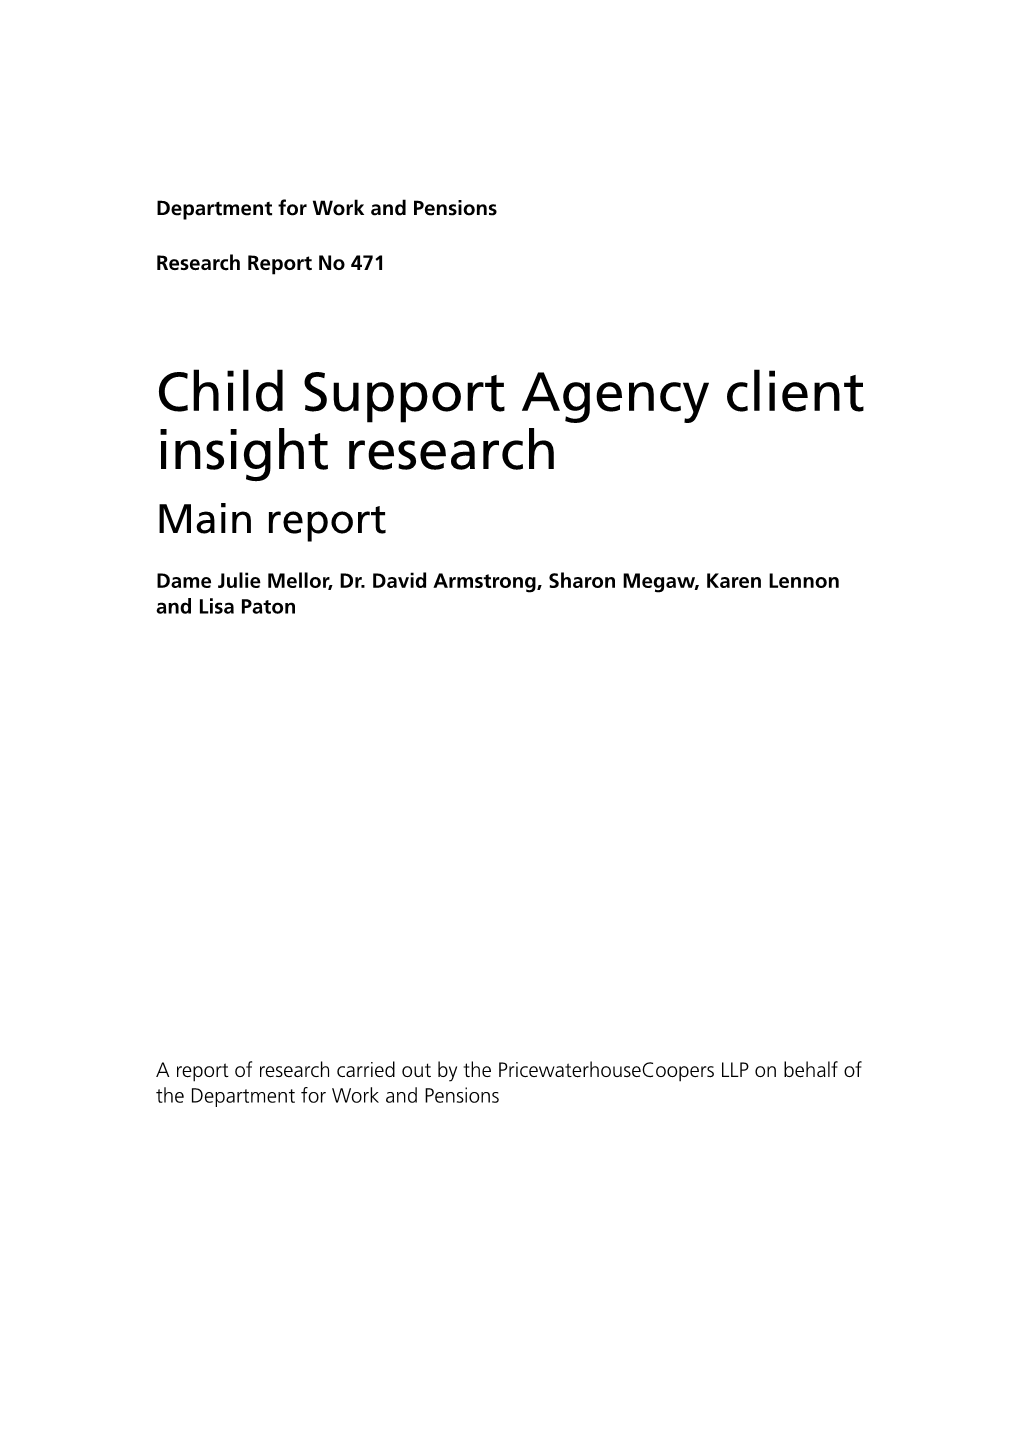 Child Support Agency Client Insight Research Main Report